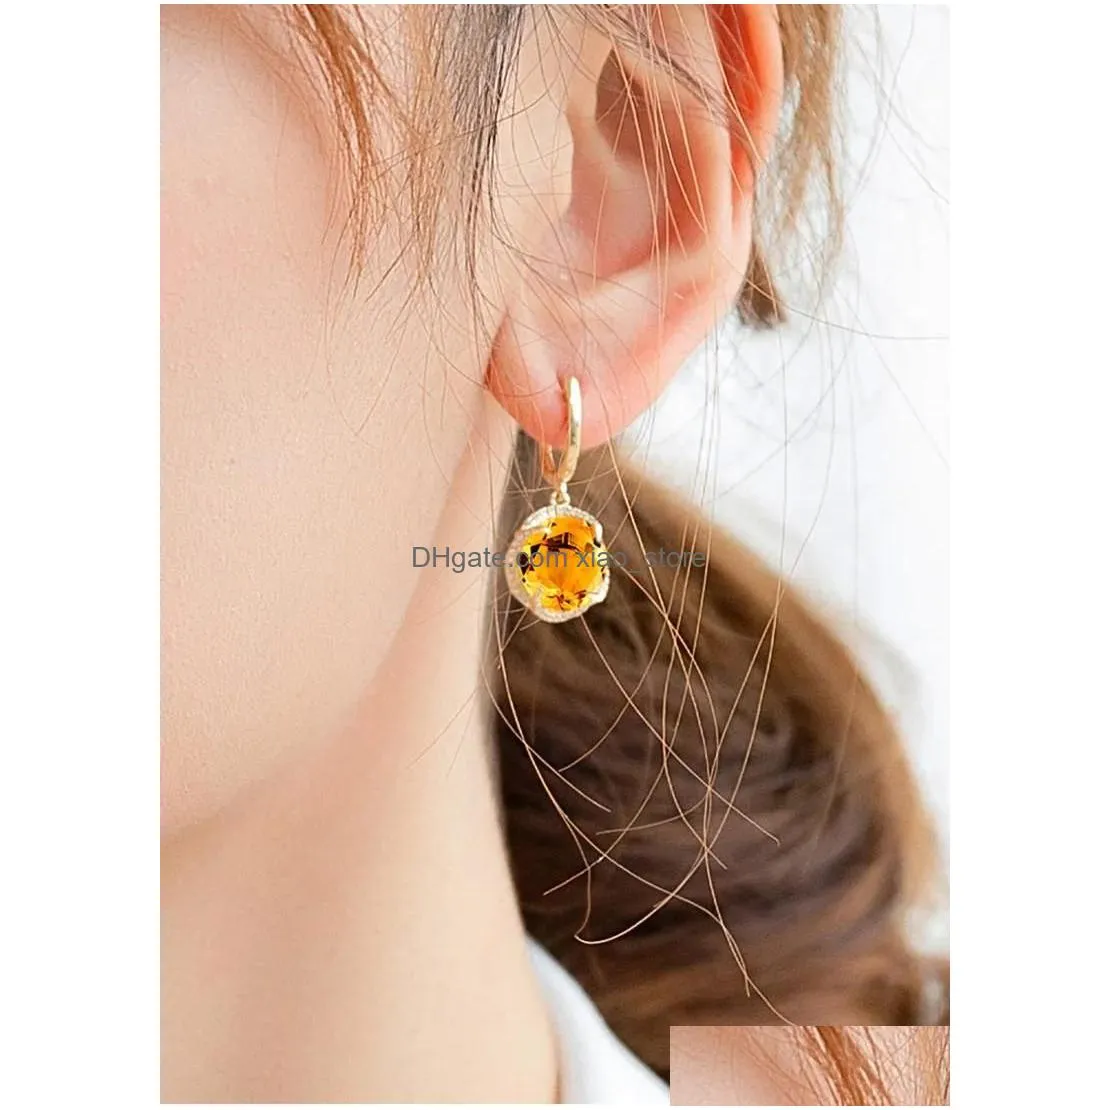 necklaces black angel 2020 citrine cz wedding jewelry set long clip earrings necklace ring for women engagement christmas gift